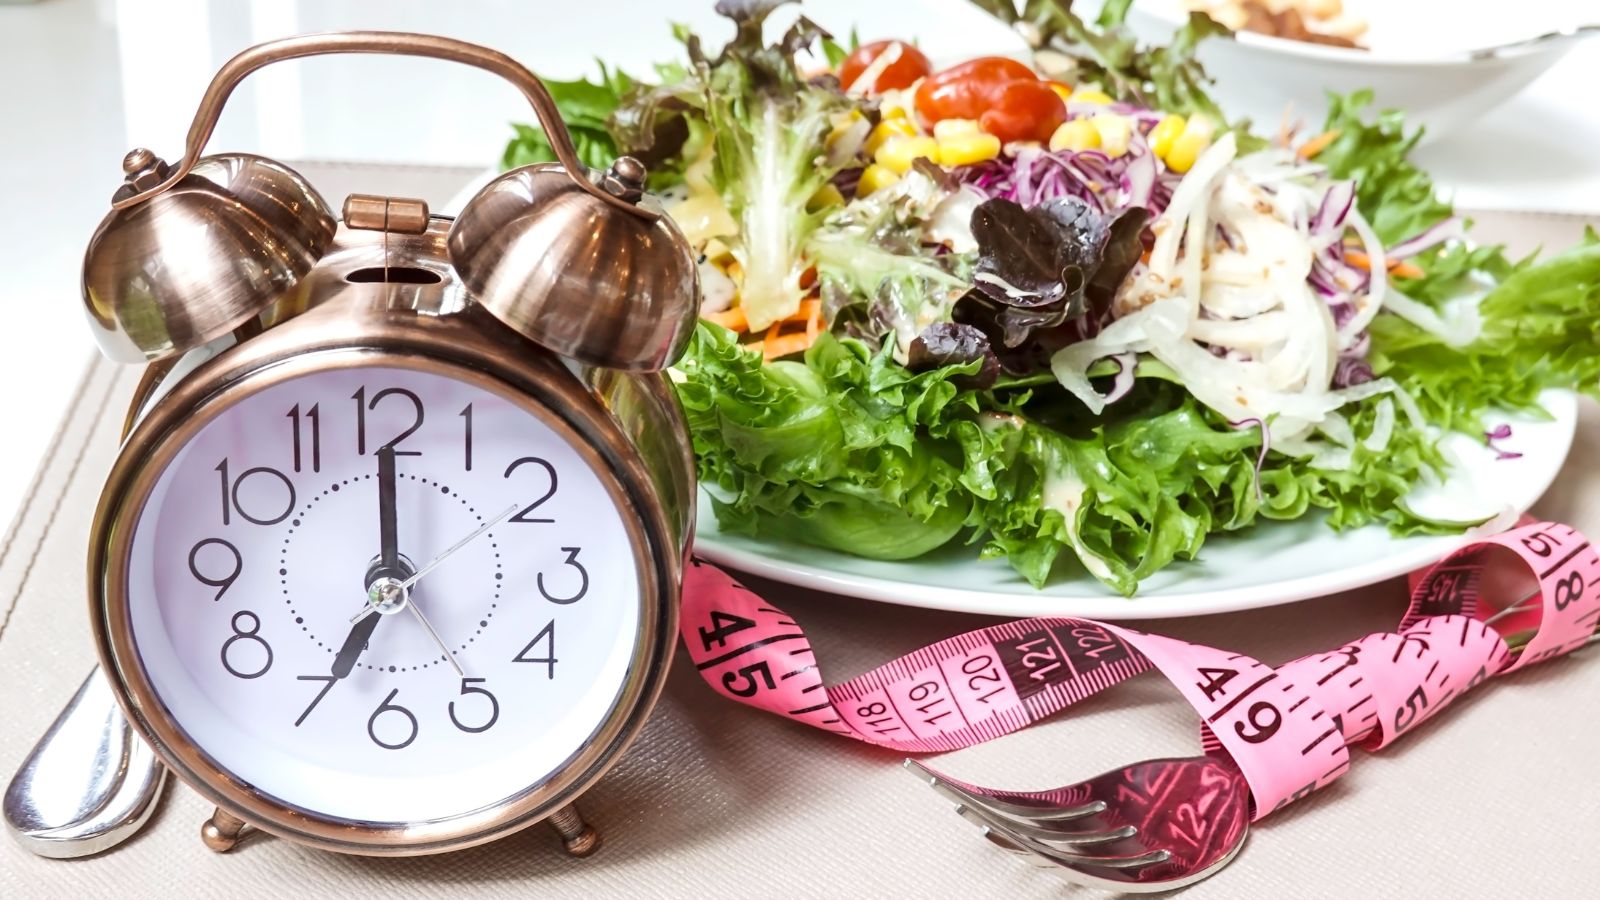 Learn the Basics of Intermittent Fasting to Drop Pounds Quickly!